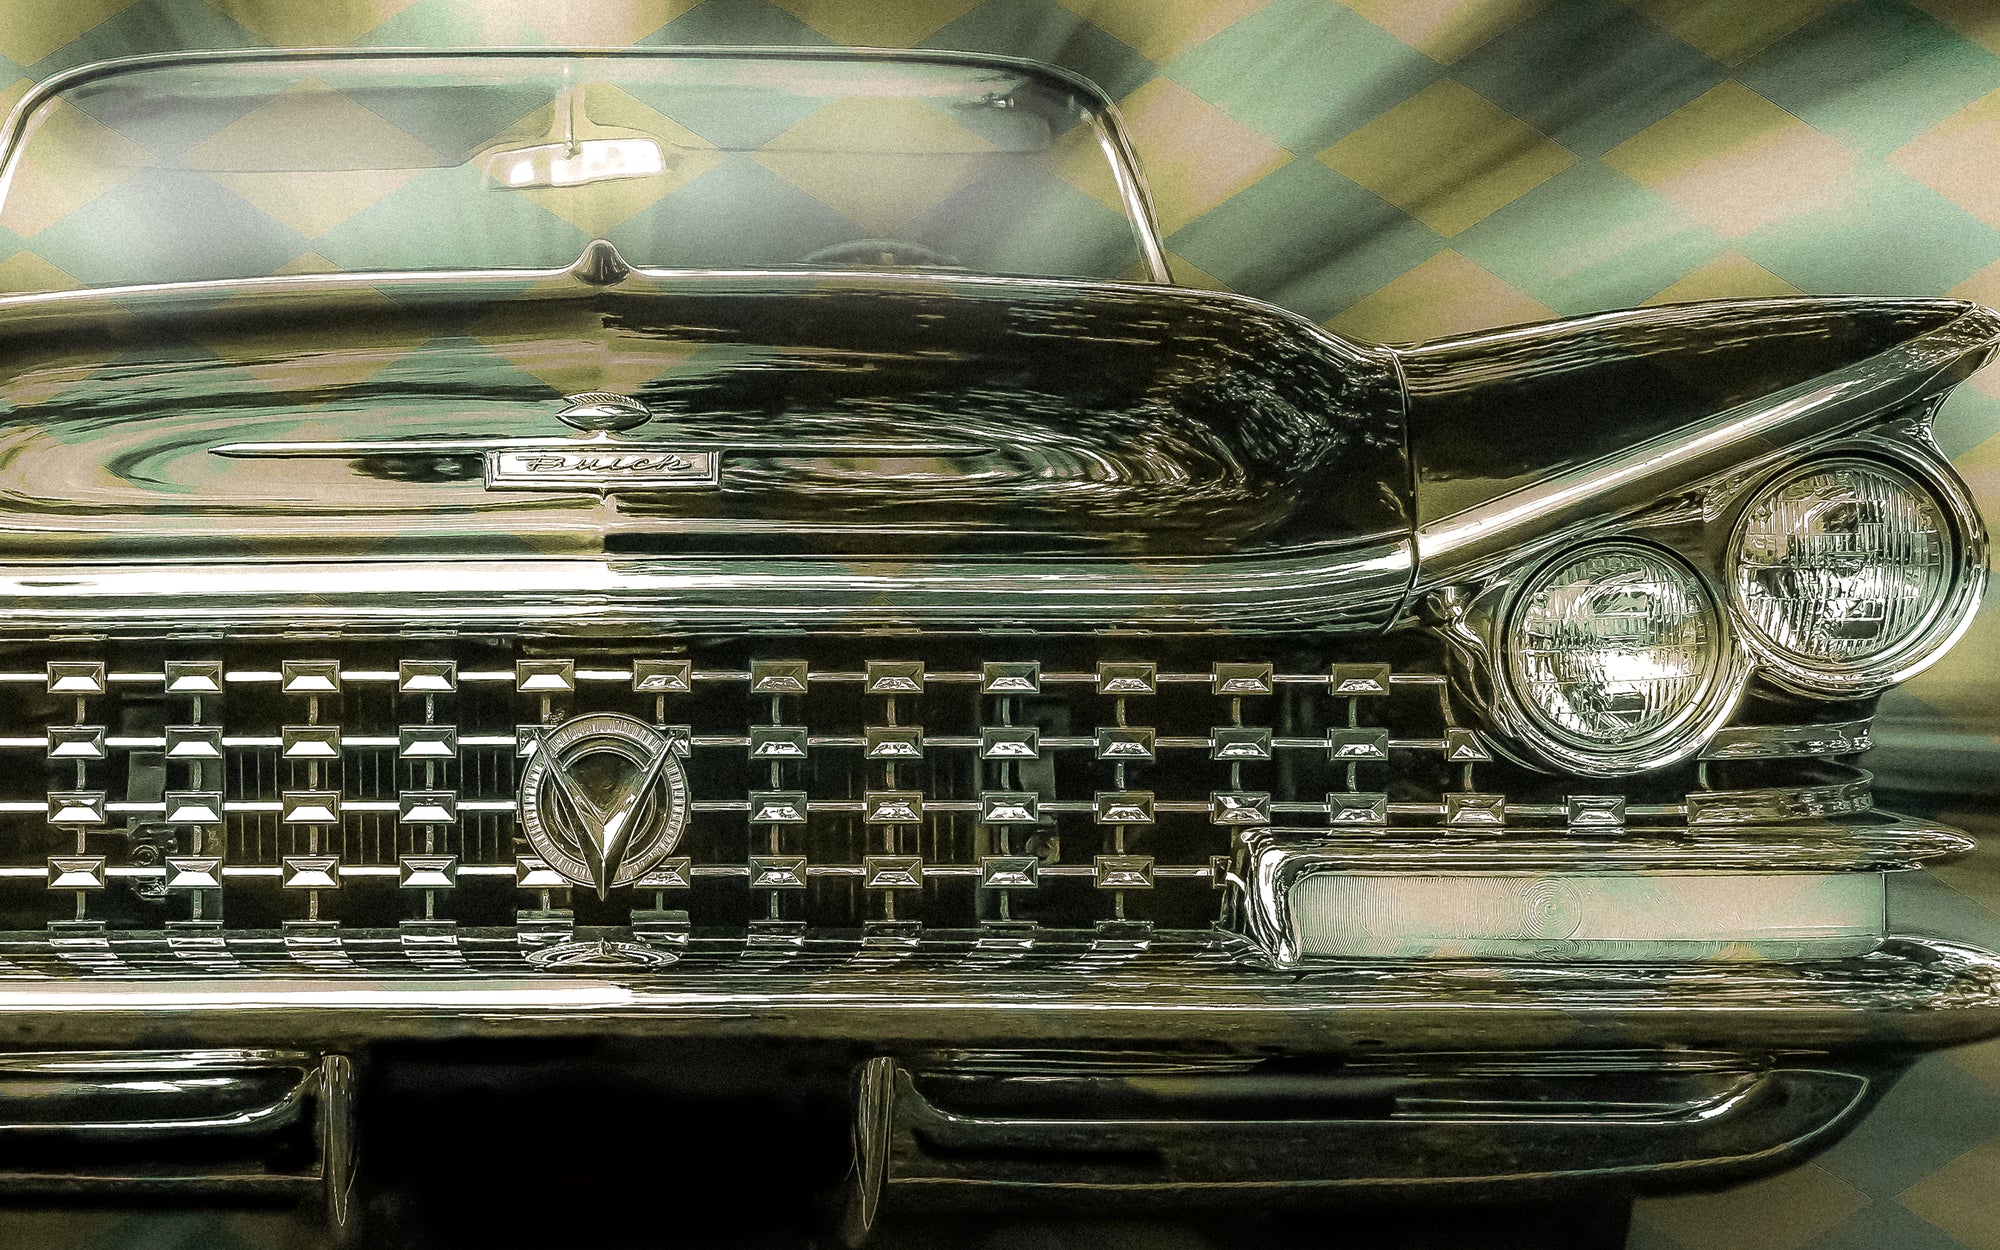 The '59 Buick Electra